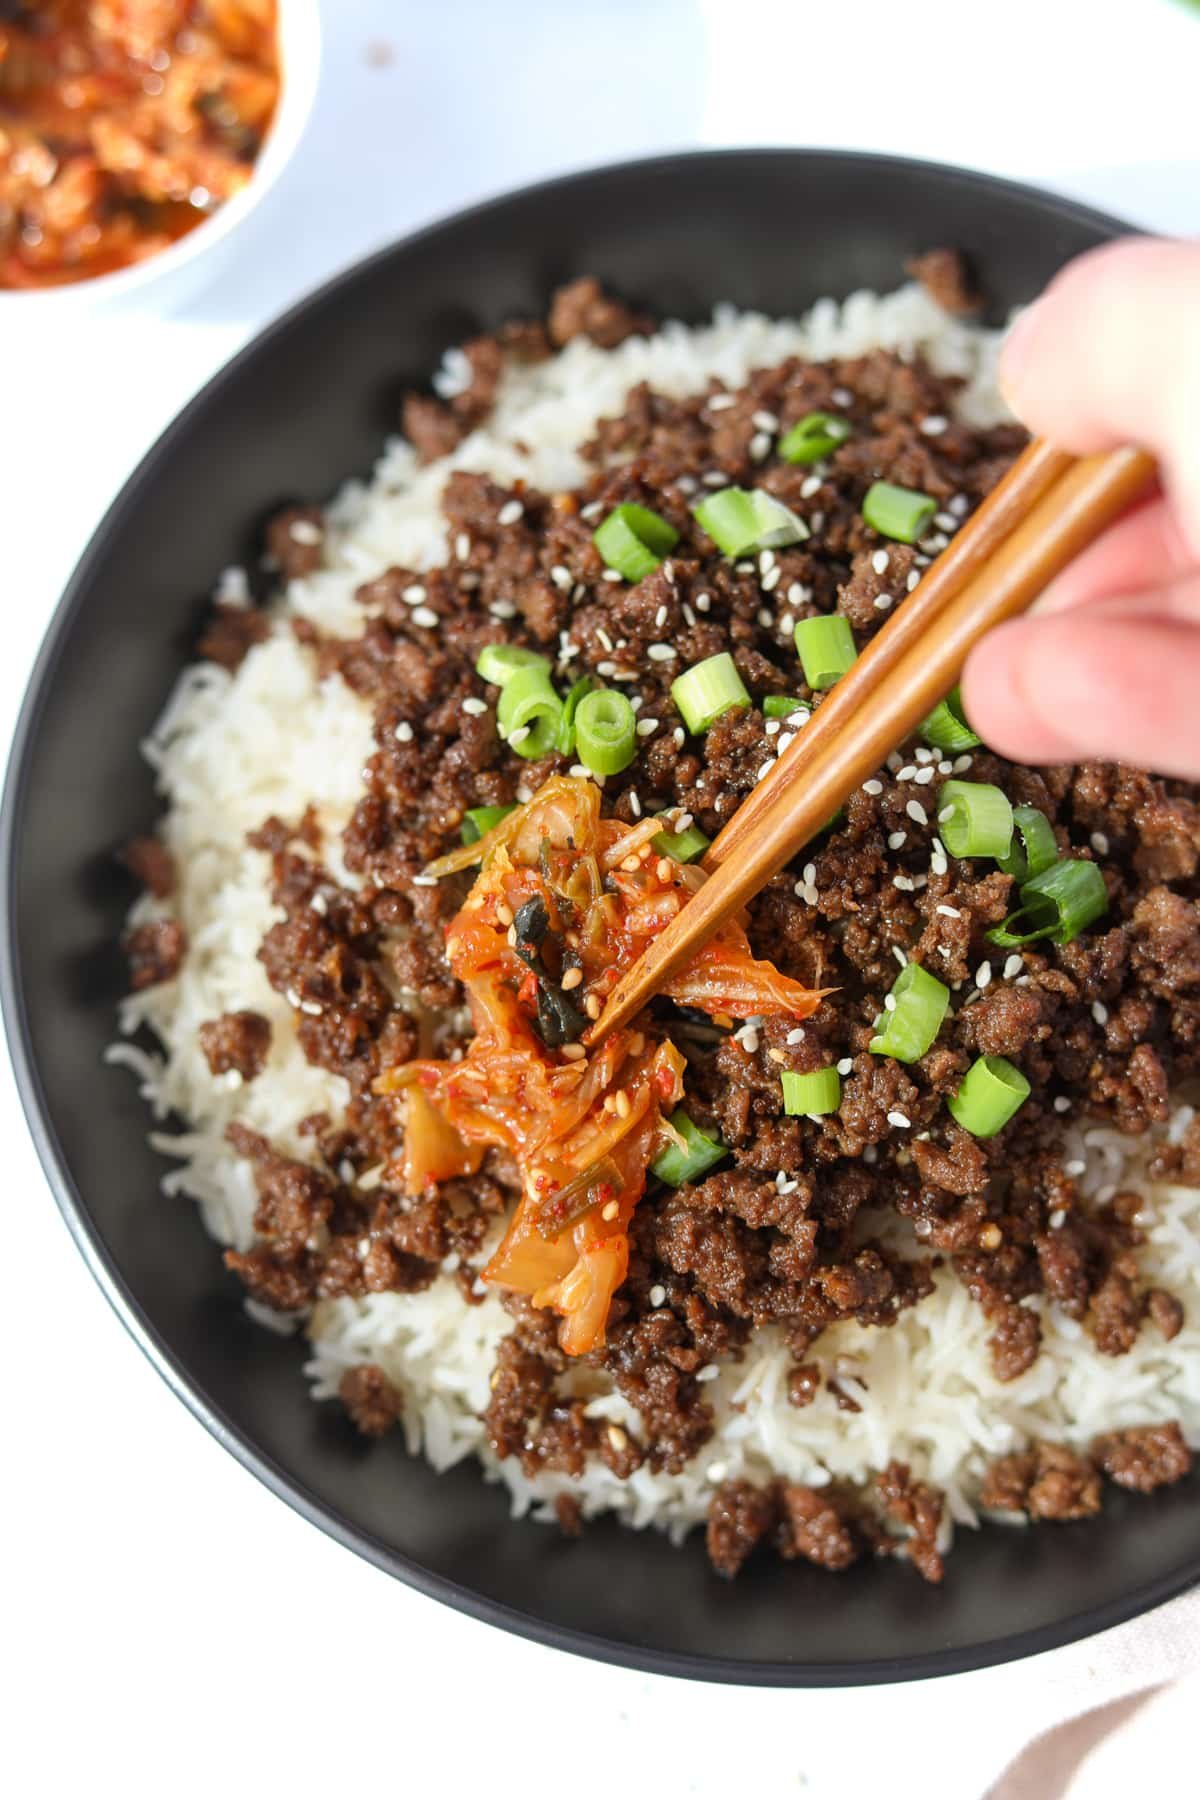 Placing a piece of kimchi on a bowl of Korean beef and rice.